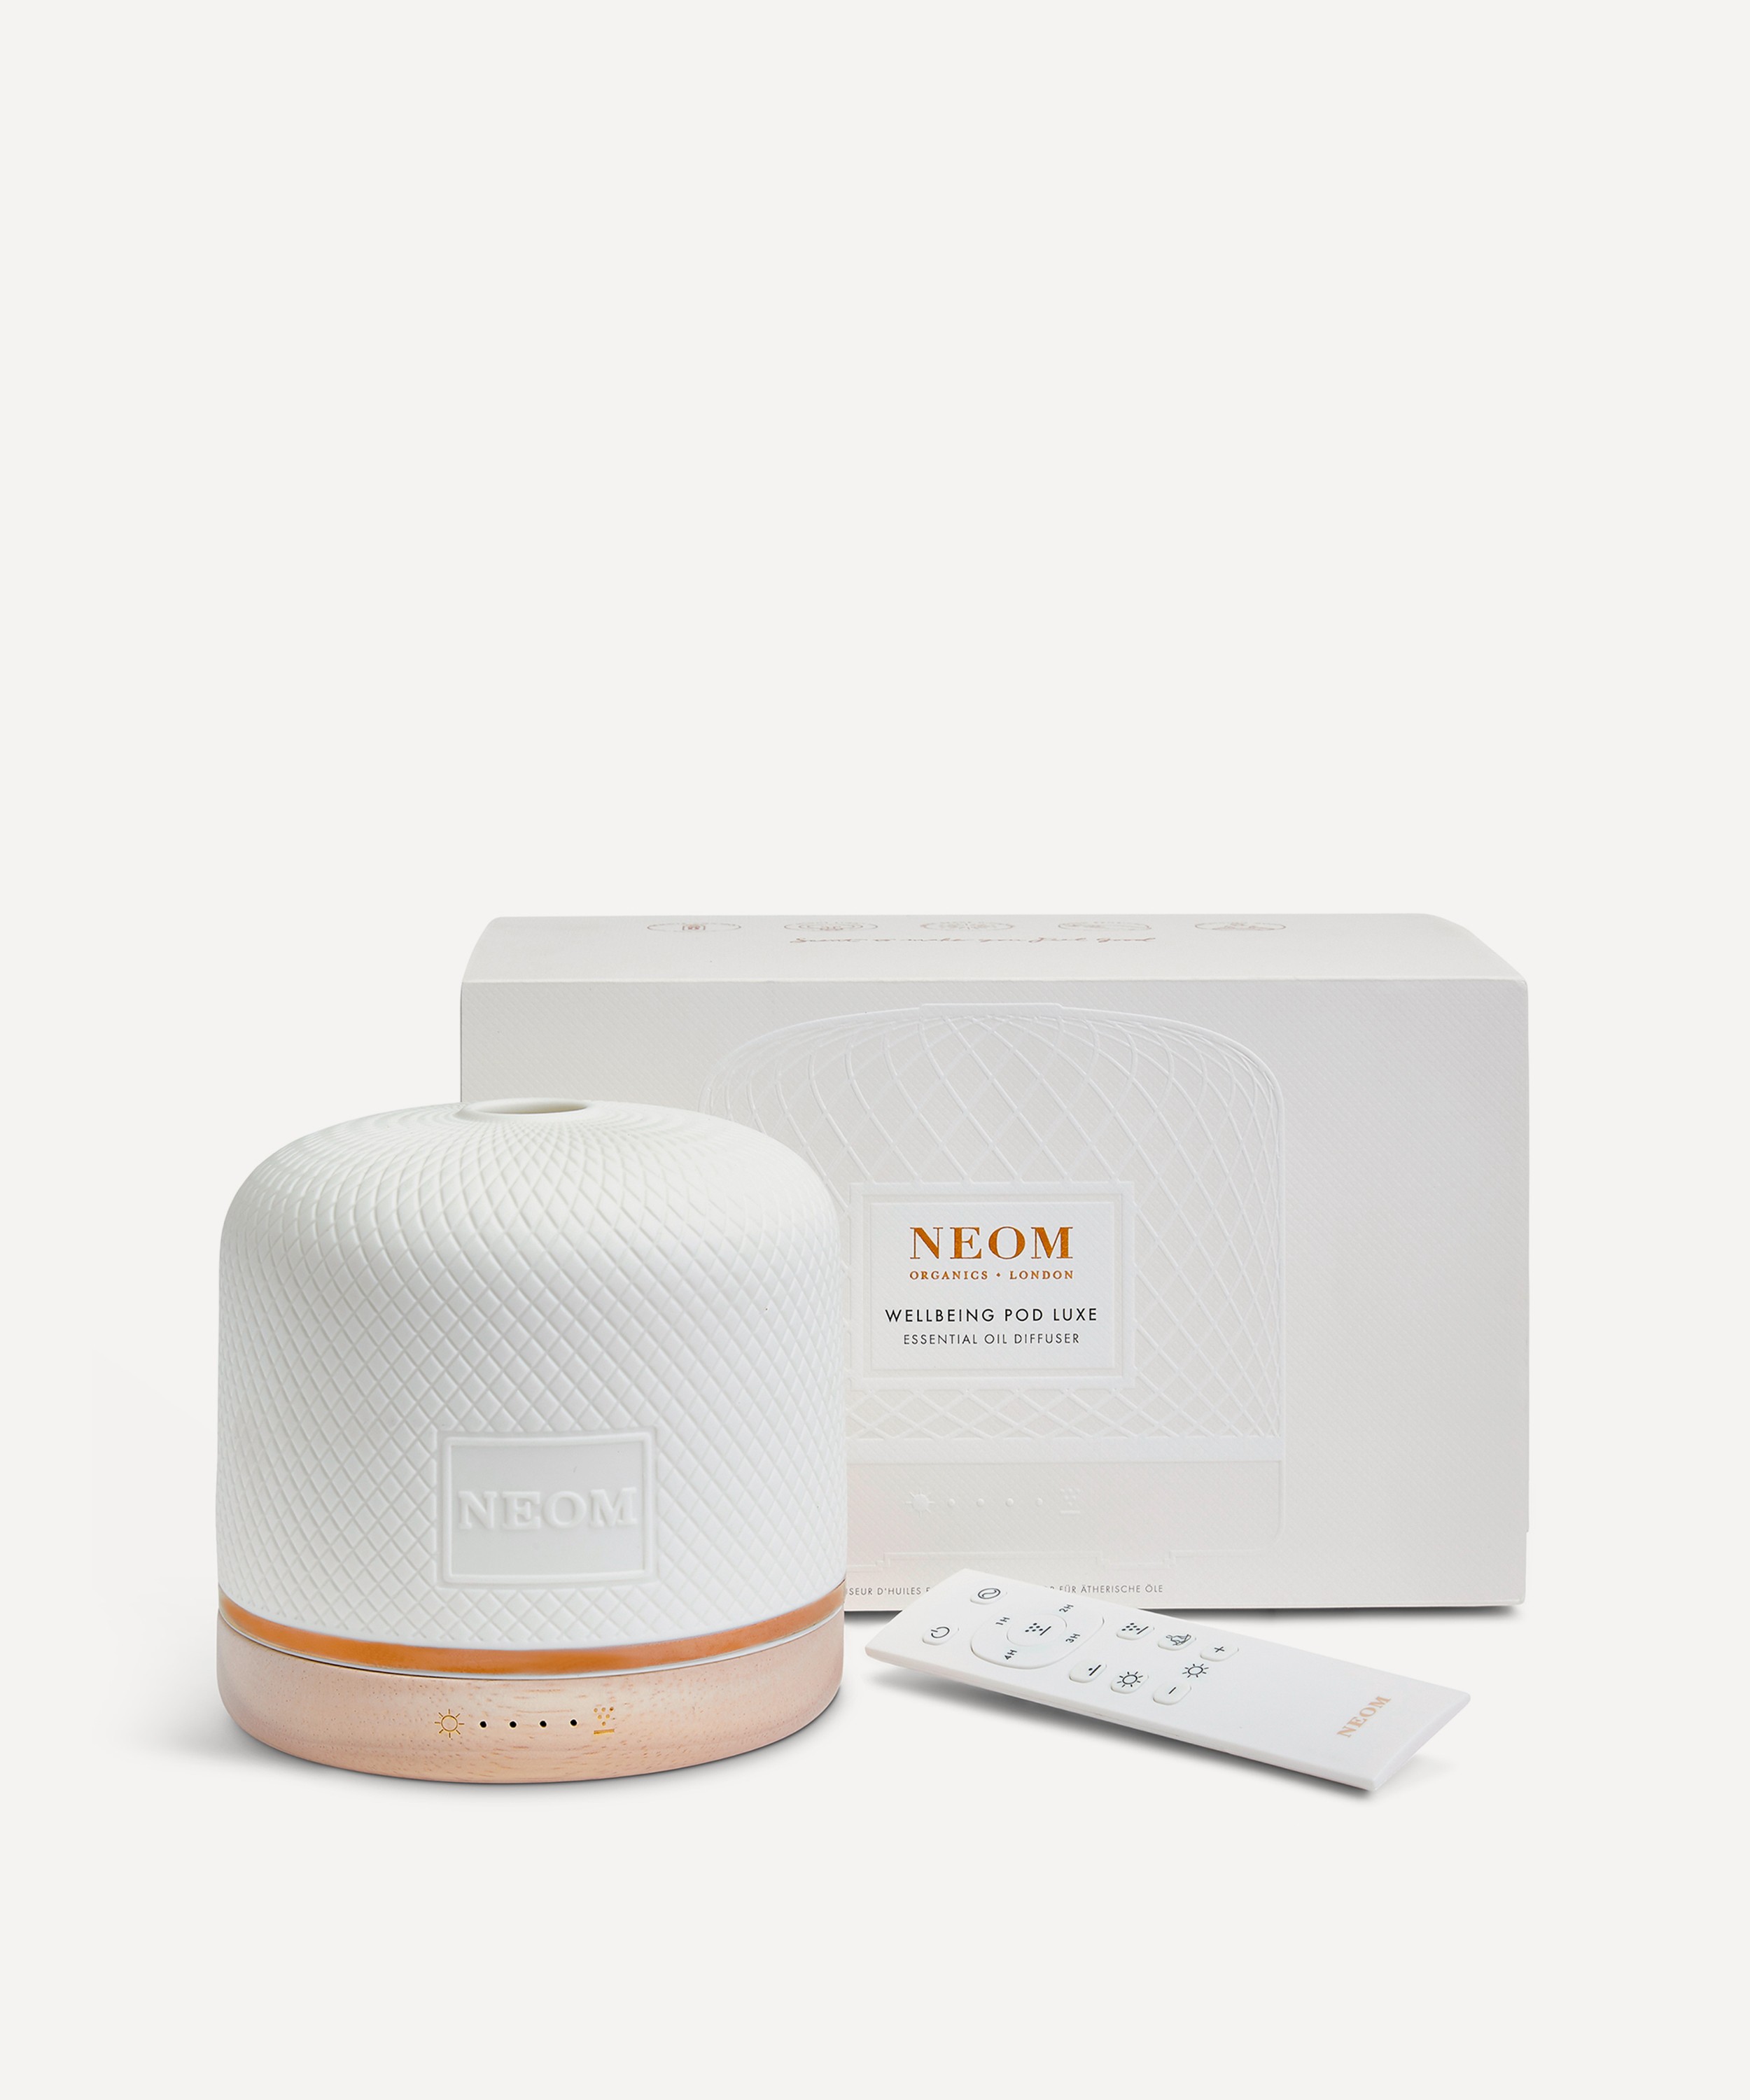 NEOM Organics - Wellbeing Pod Luxe image number 0